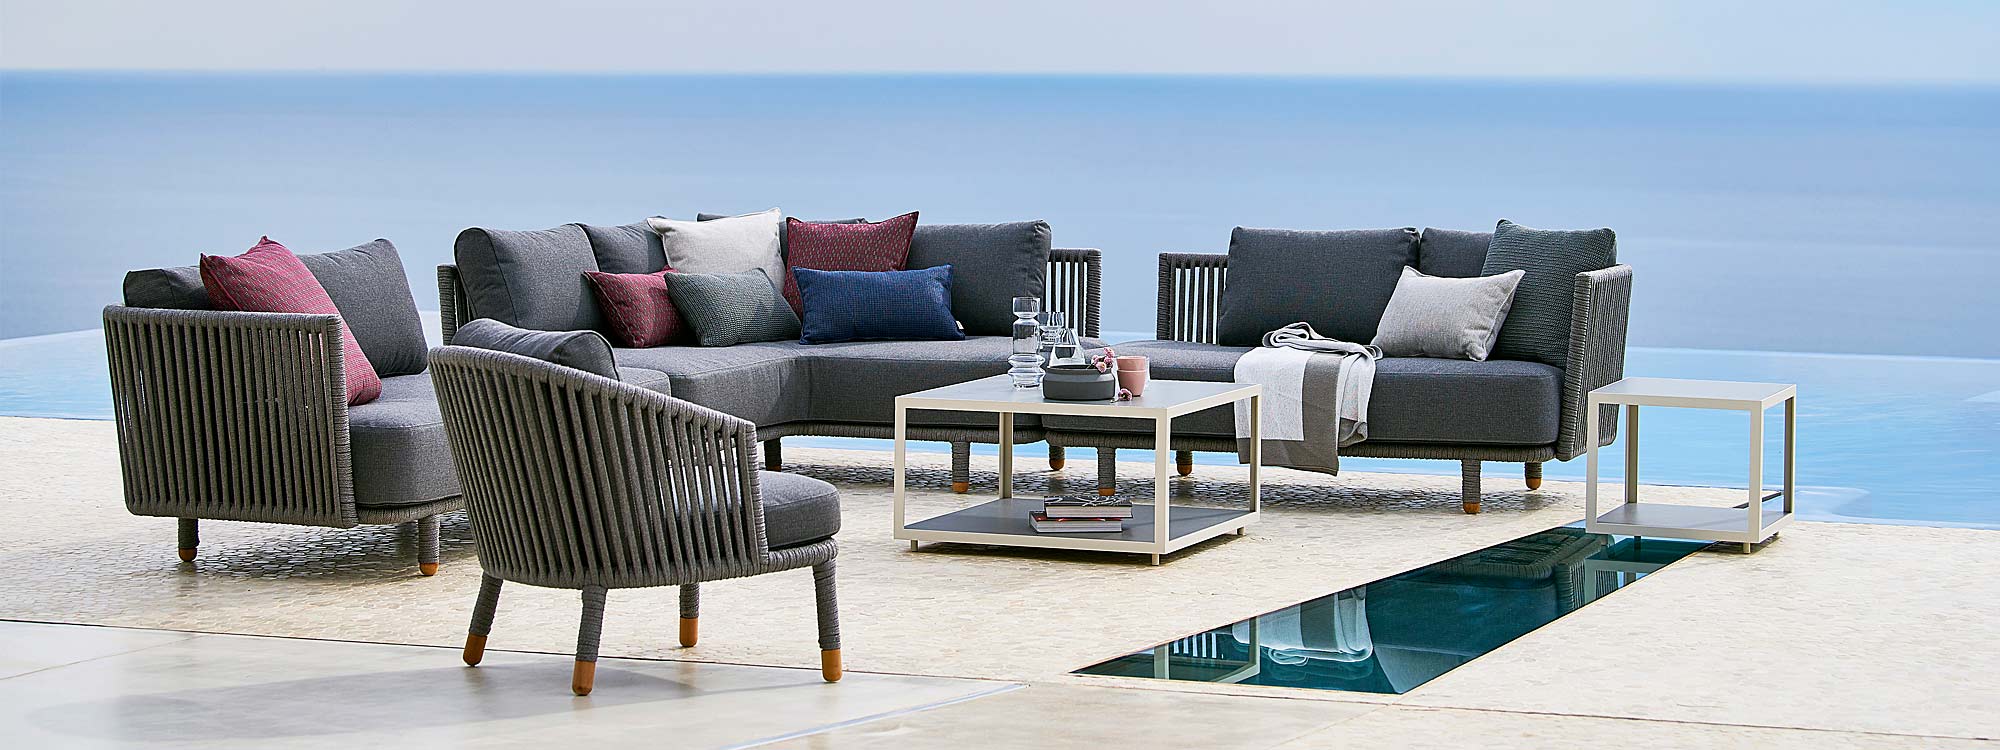 Image of seaside terrace with grey Moments corner sofa and Level outdoor coffee tables by Cane-line